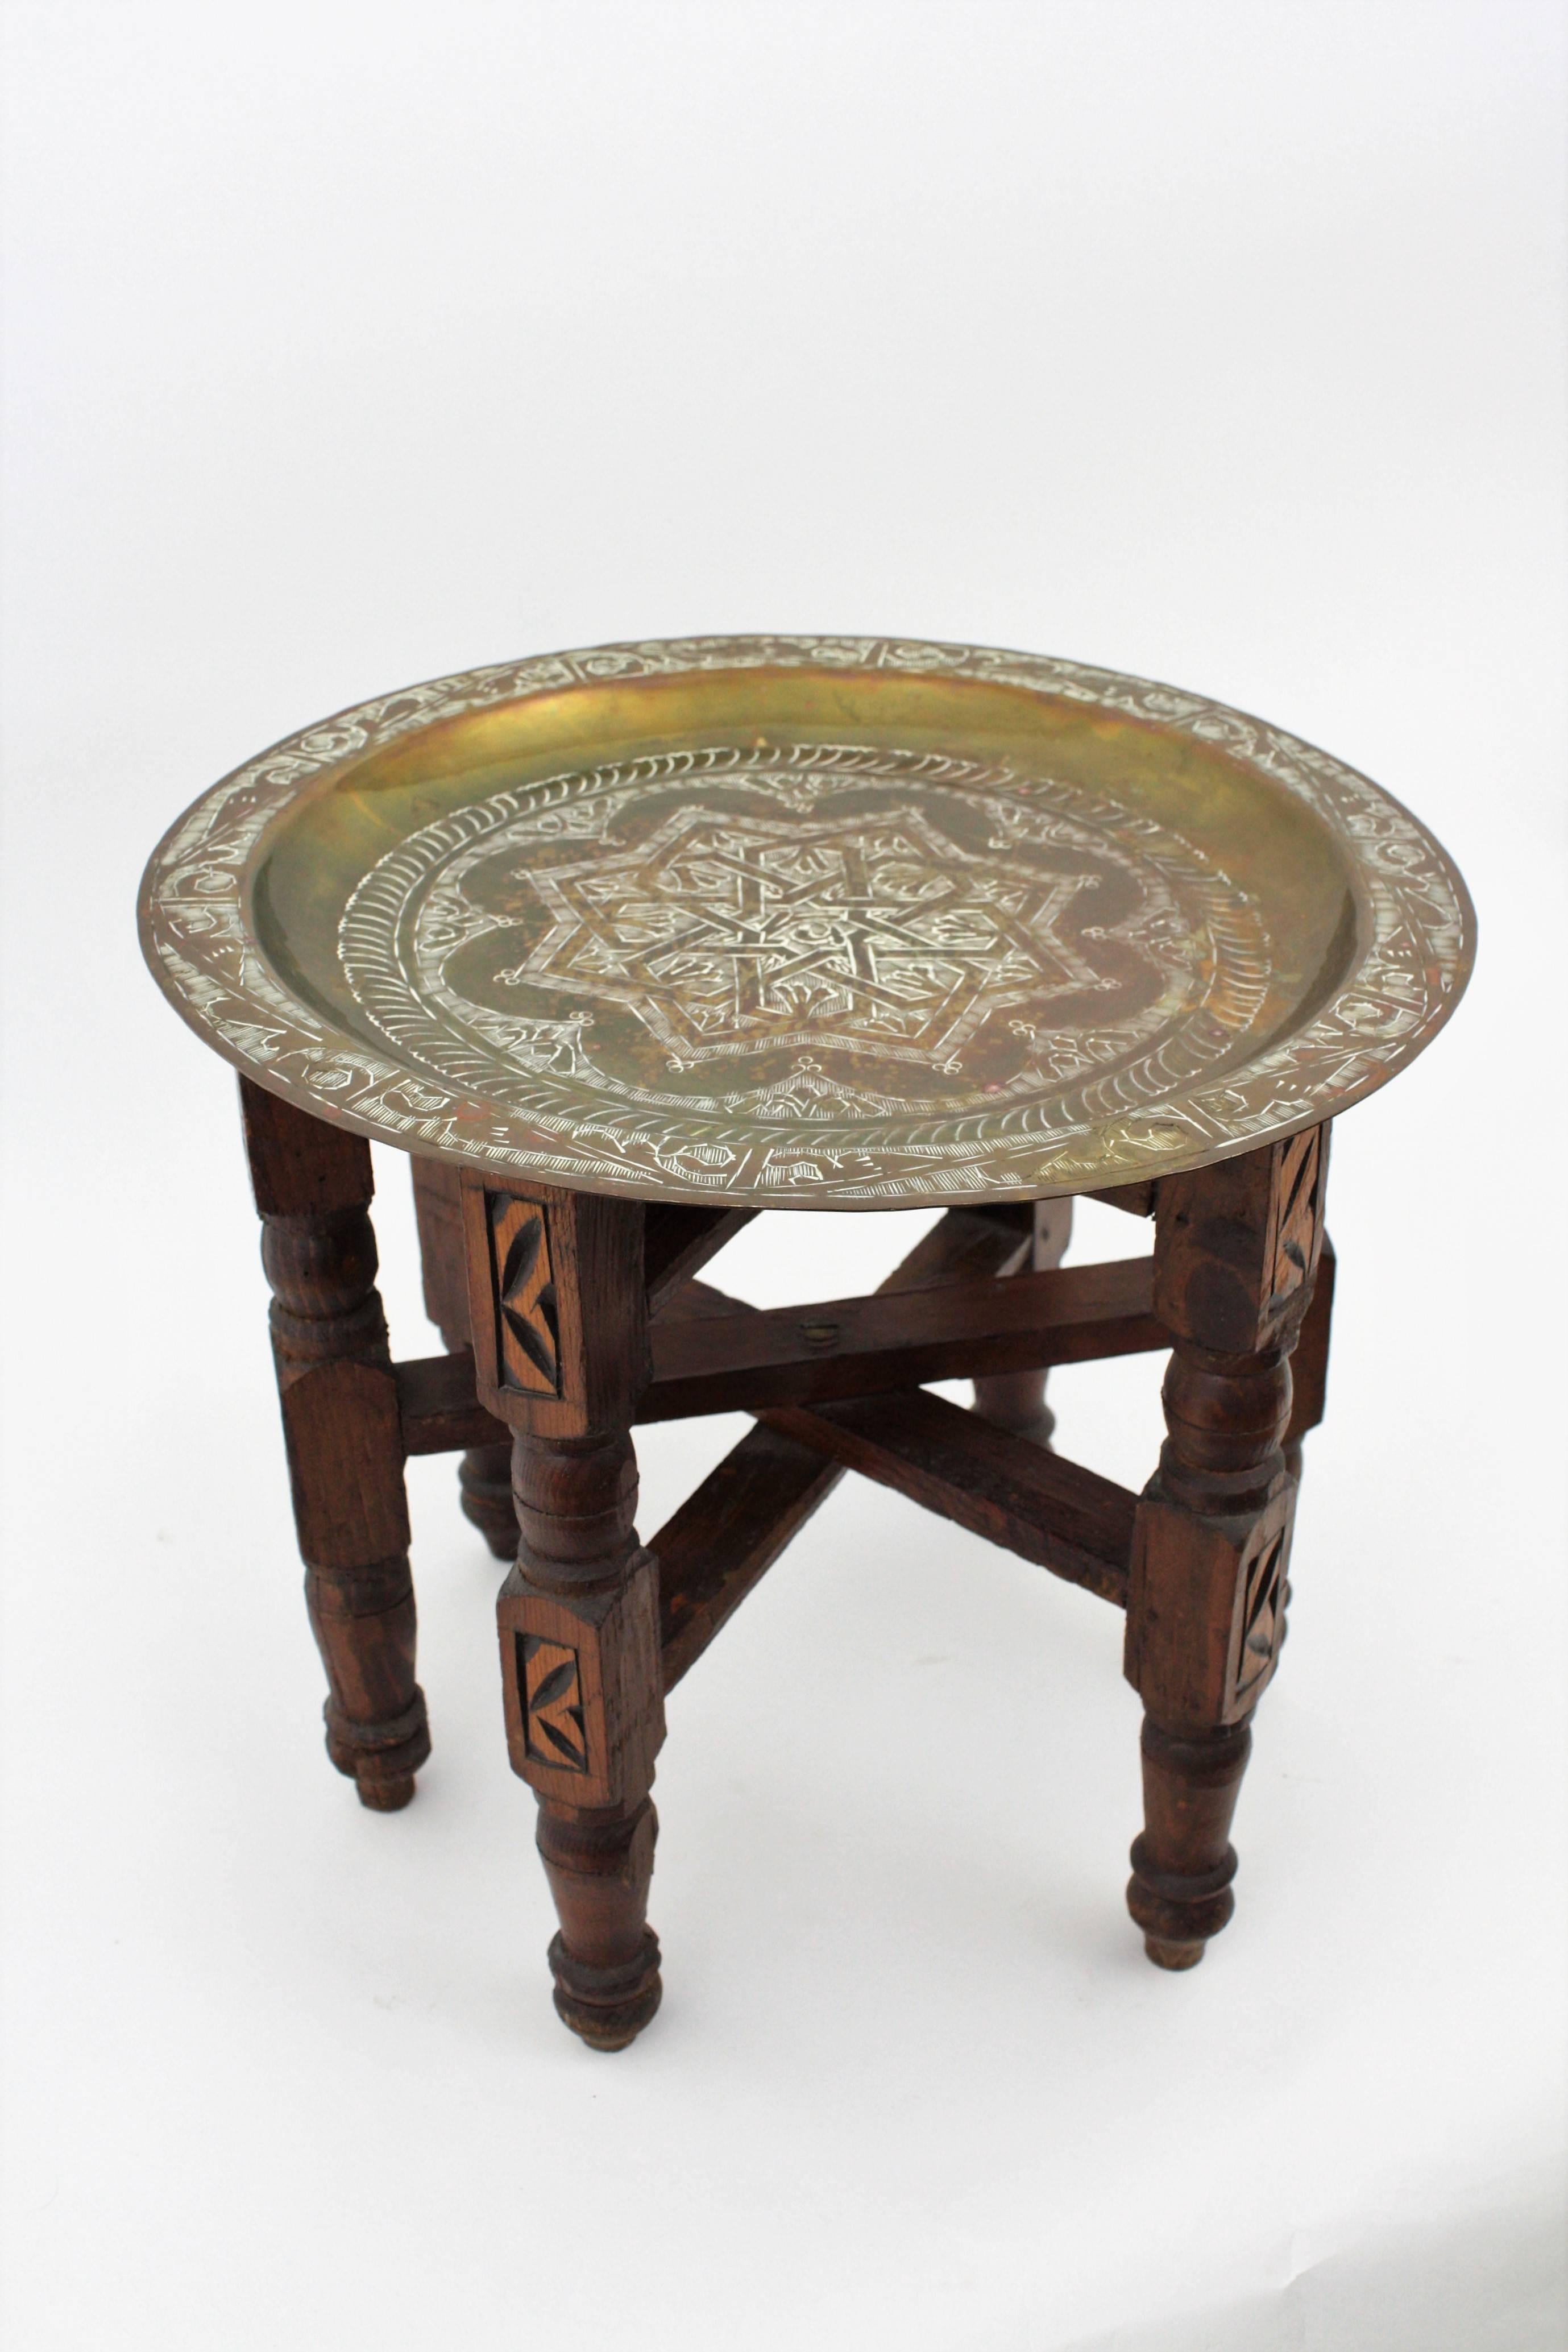 A rare miniature sized hand-hammered brass and wood folding tray table. The tray has engraved Arabic details and the wooden part has carved decorations. Useful as a pedestal and difficult to find in this size.
Morocco, 1950s.